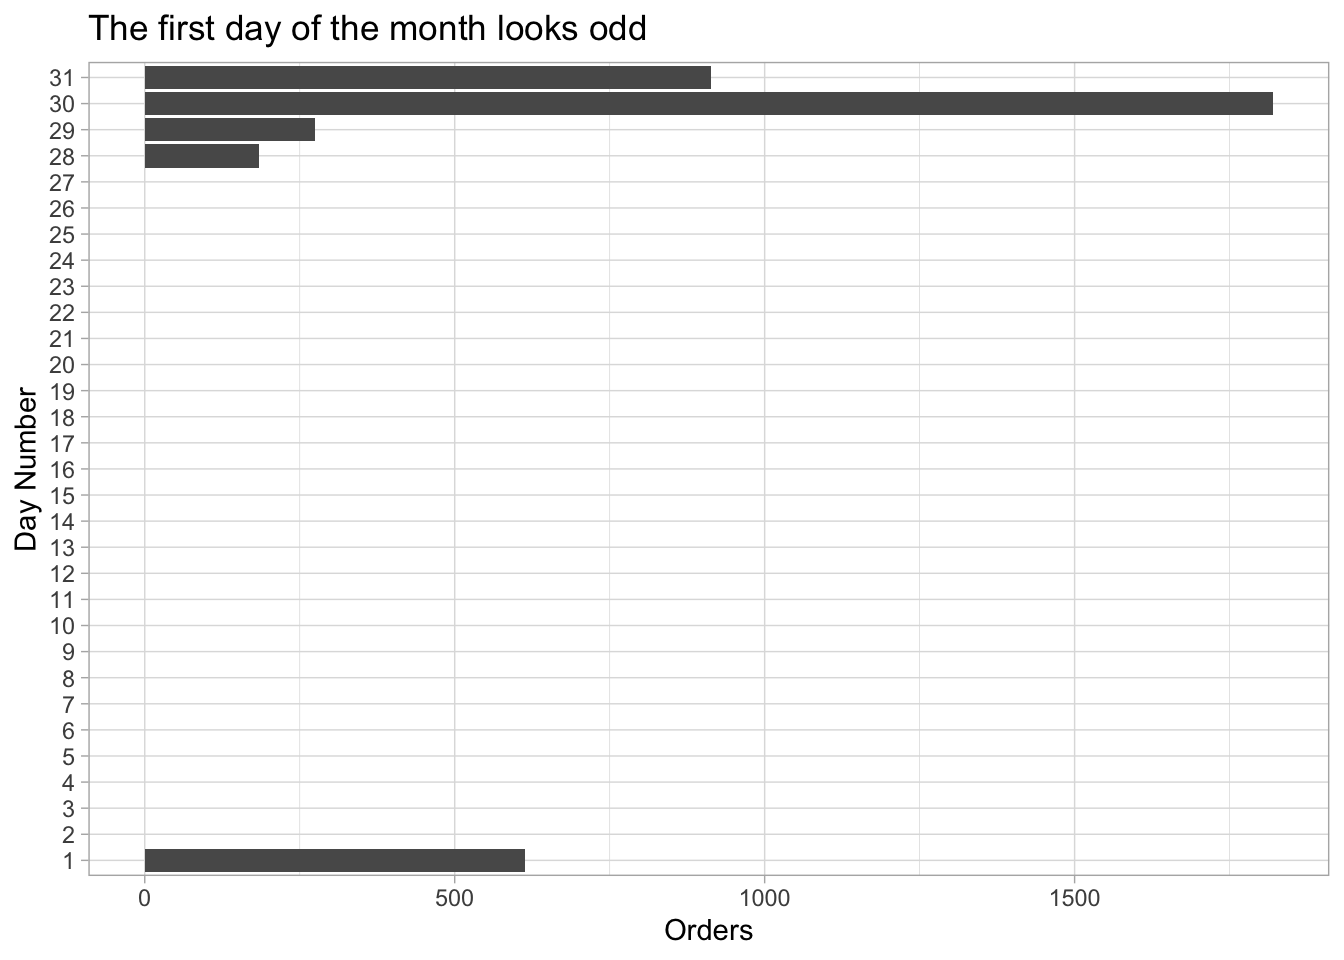 Days of the month with Sales Rep activity recorded